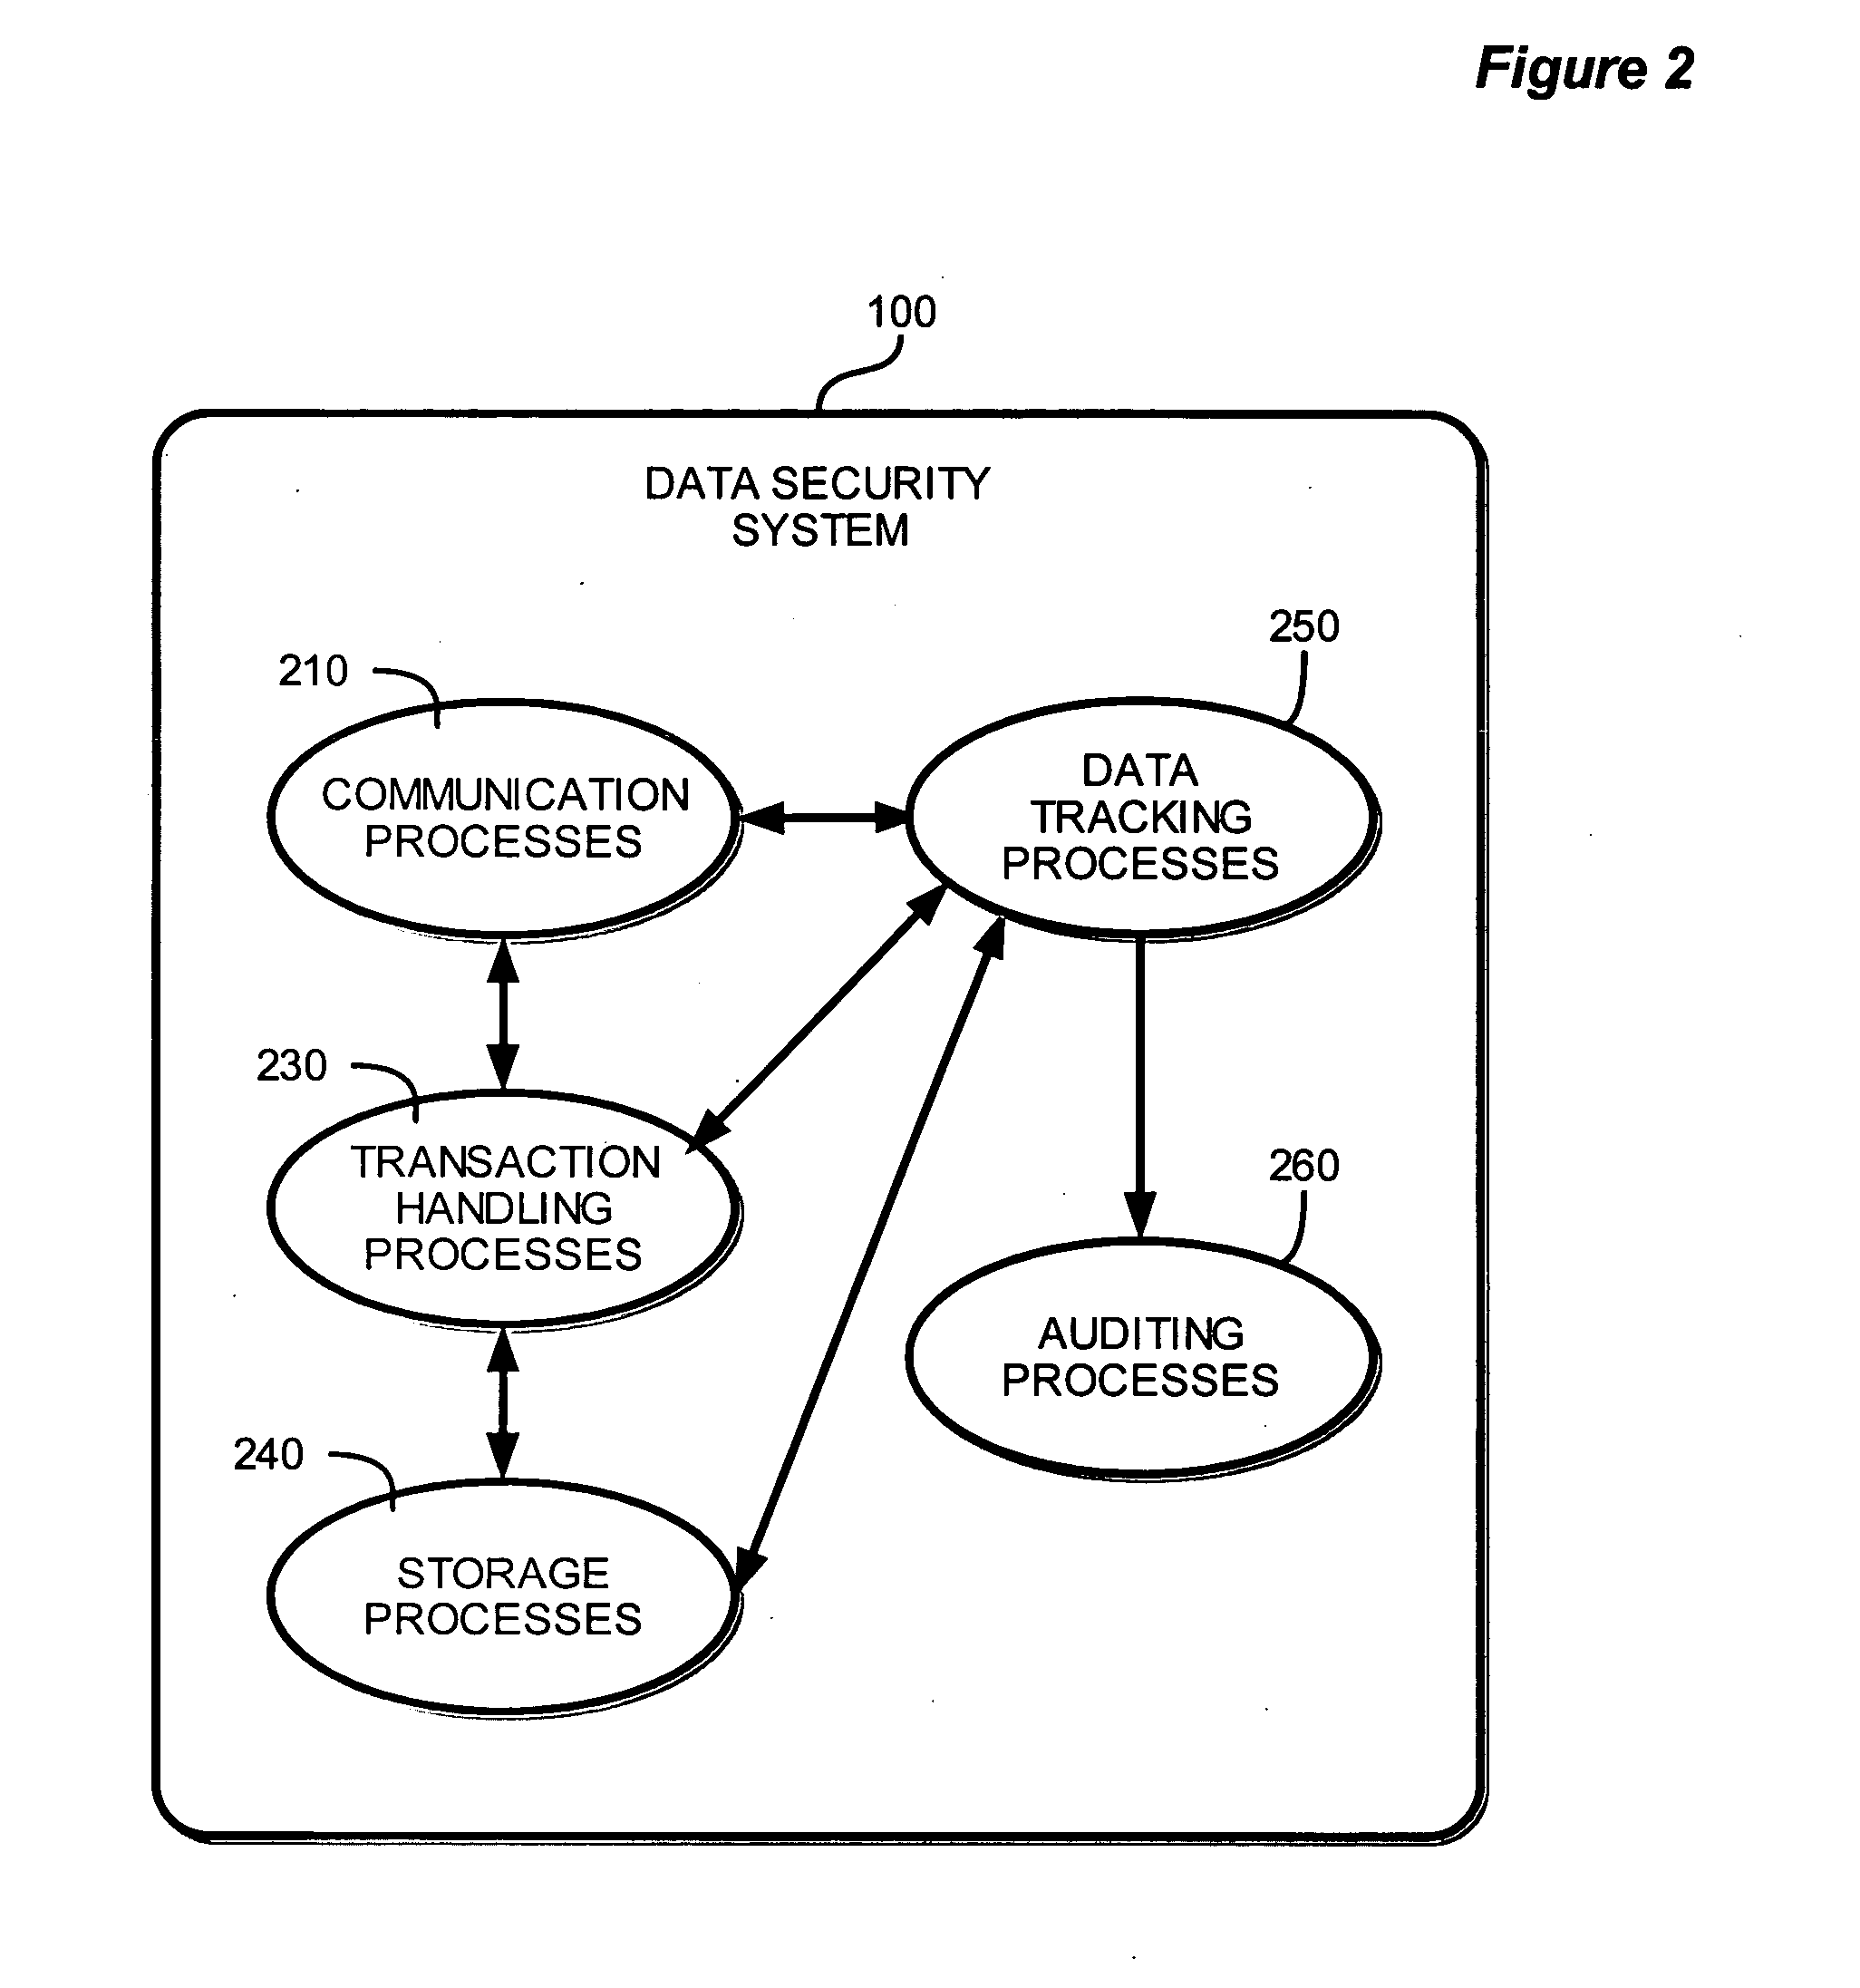 Method and system for obtaining, maintaining and distributing data